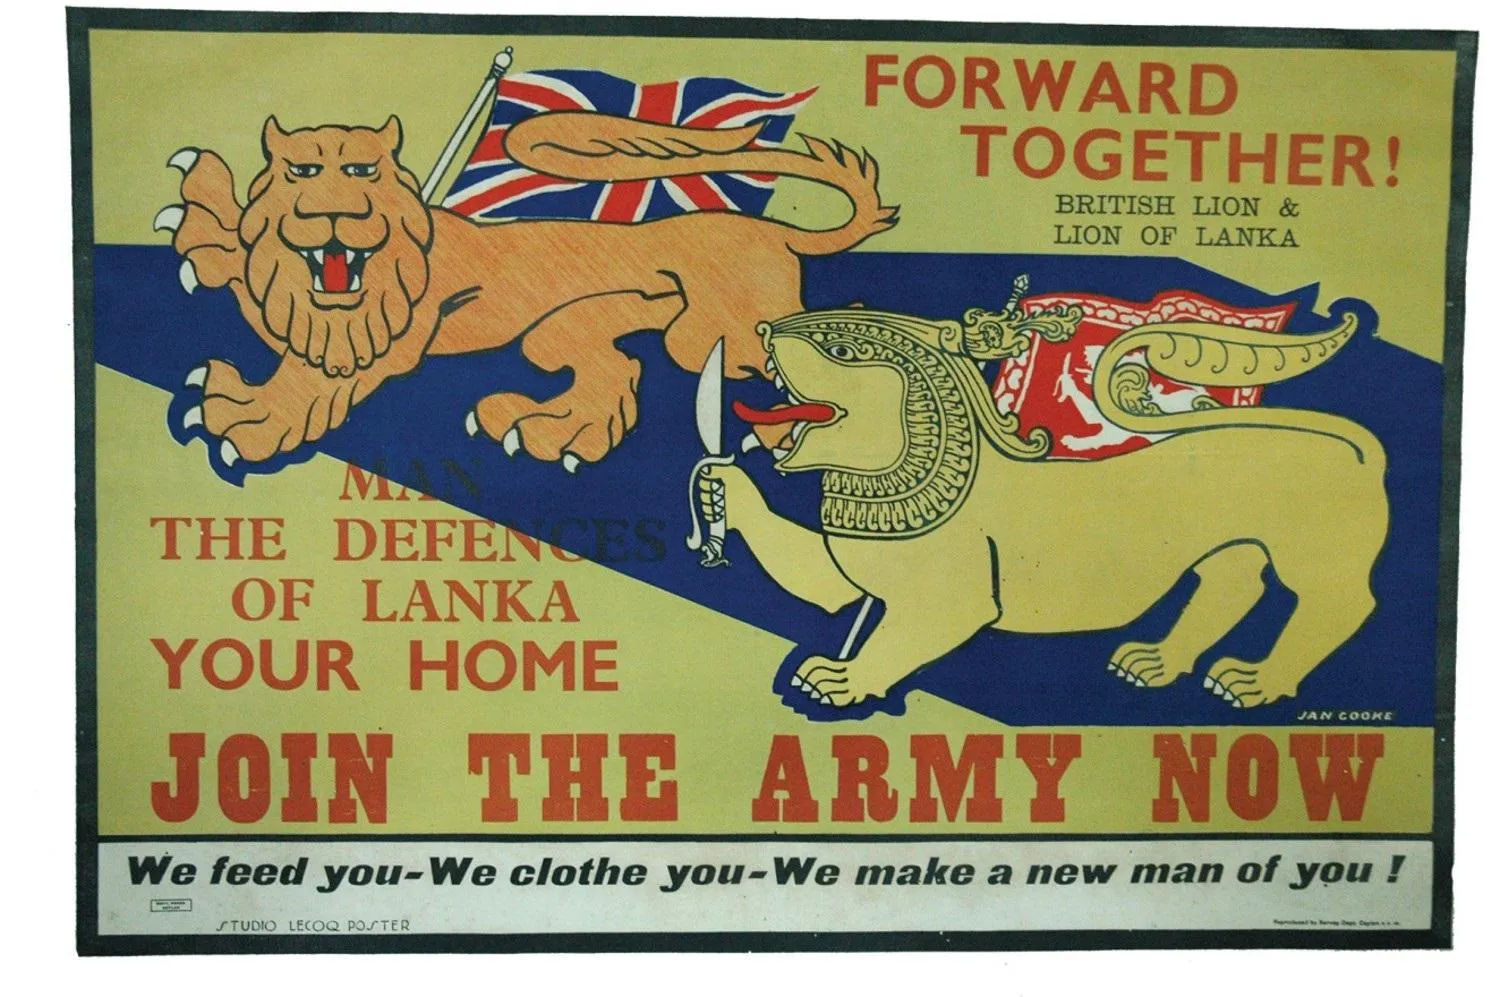 A dramatic recruitment poster from Sri Lanka, exhorting the people to join the forces. Found in the Sri Lanka National Archives on a research trip in 2008.